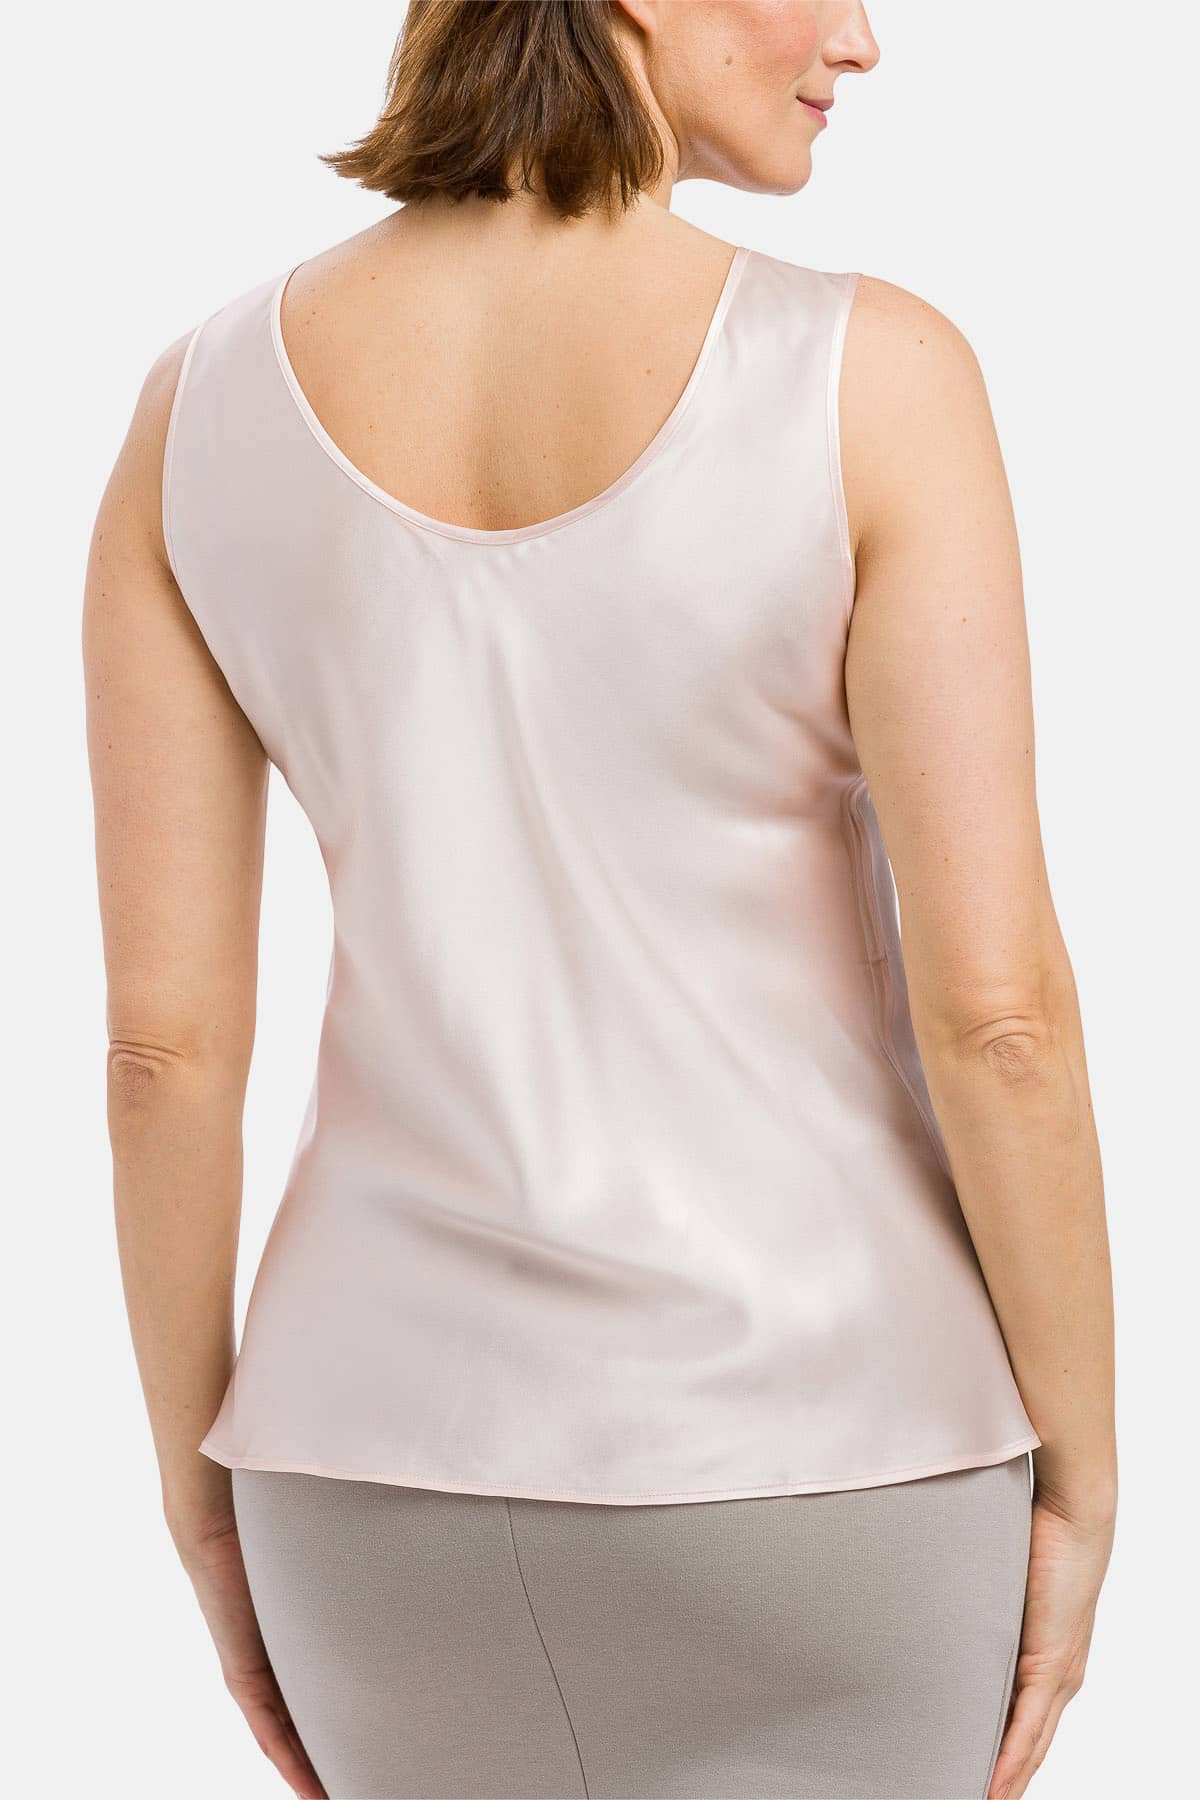 Women's 100% Pure Mulberry Silk Camisole Womens>Casual>Top Fishers Finery 